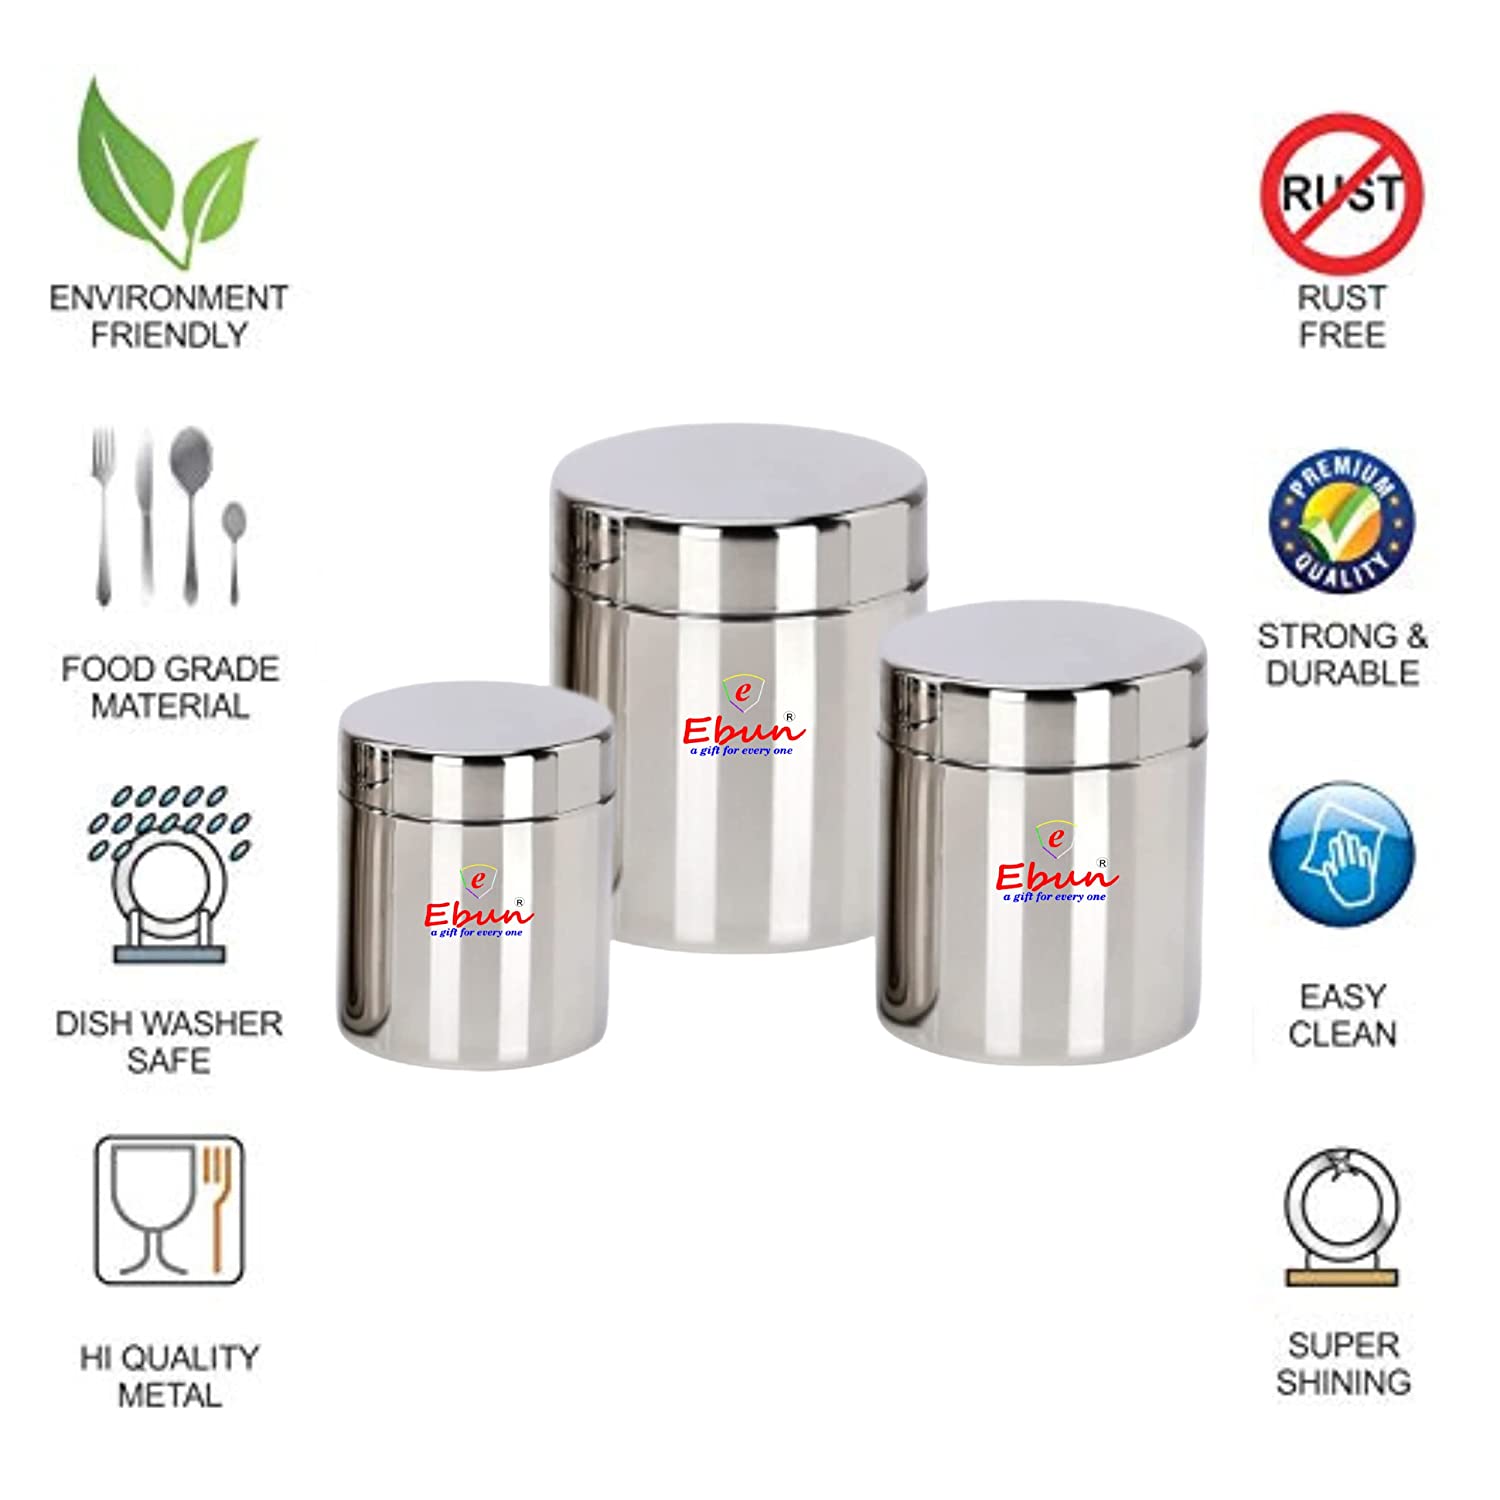 Stainless Steel Coffee Tea and Sugar Containers